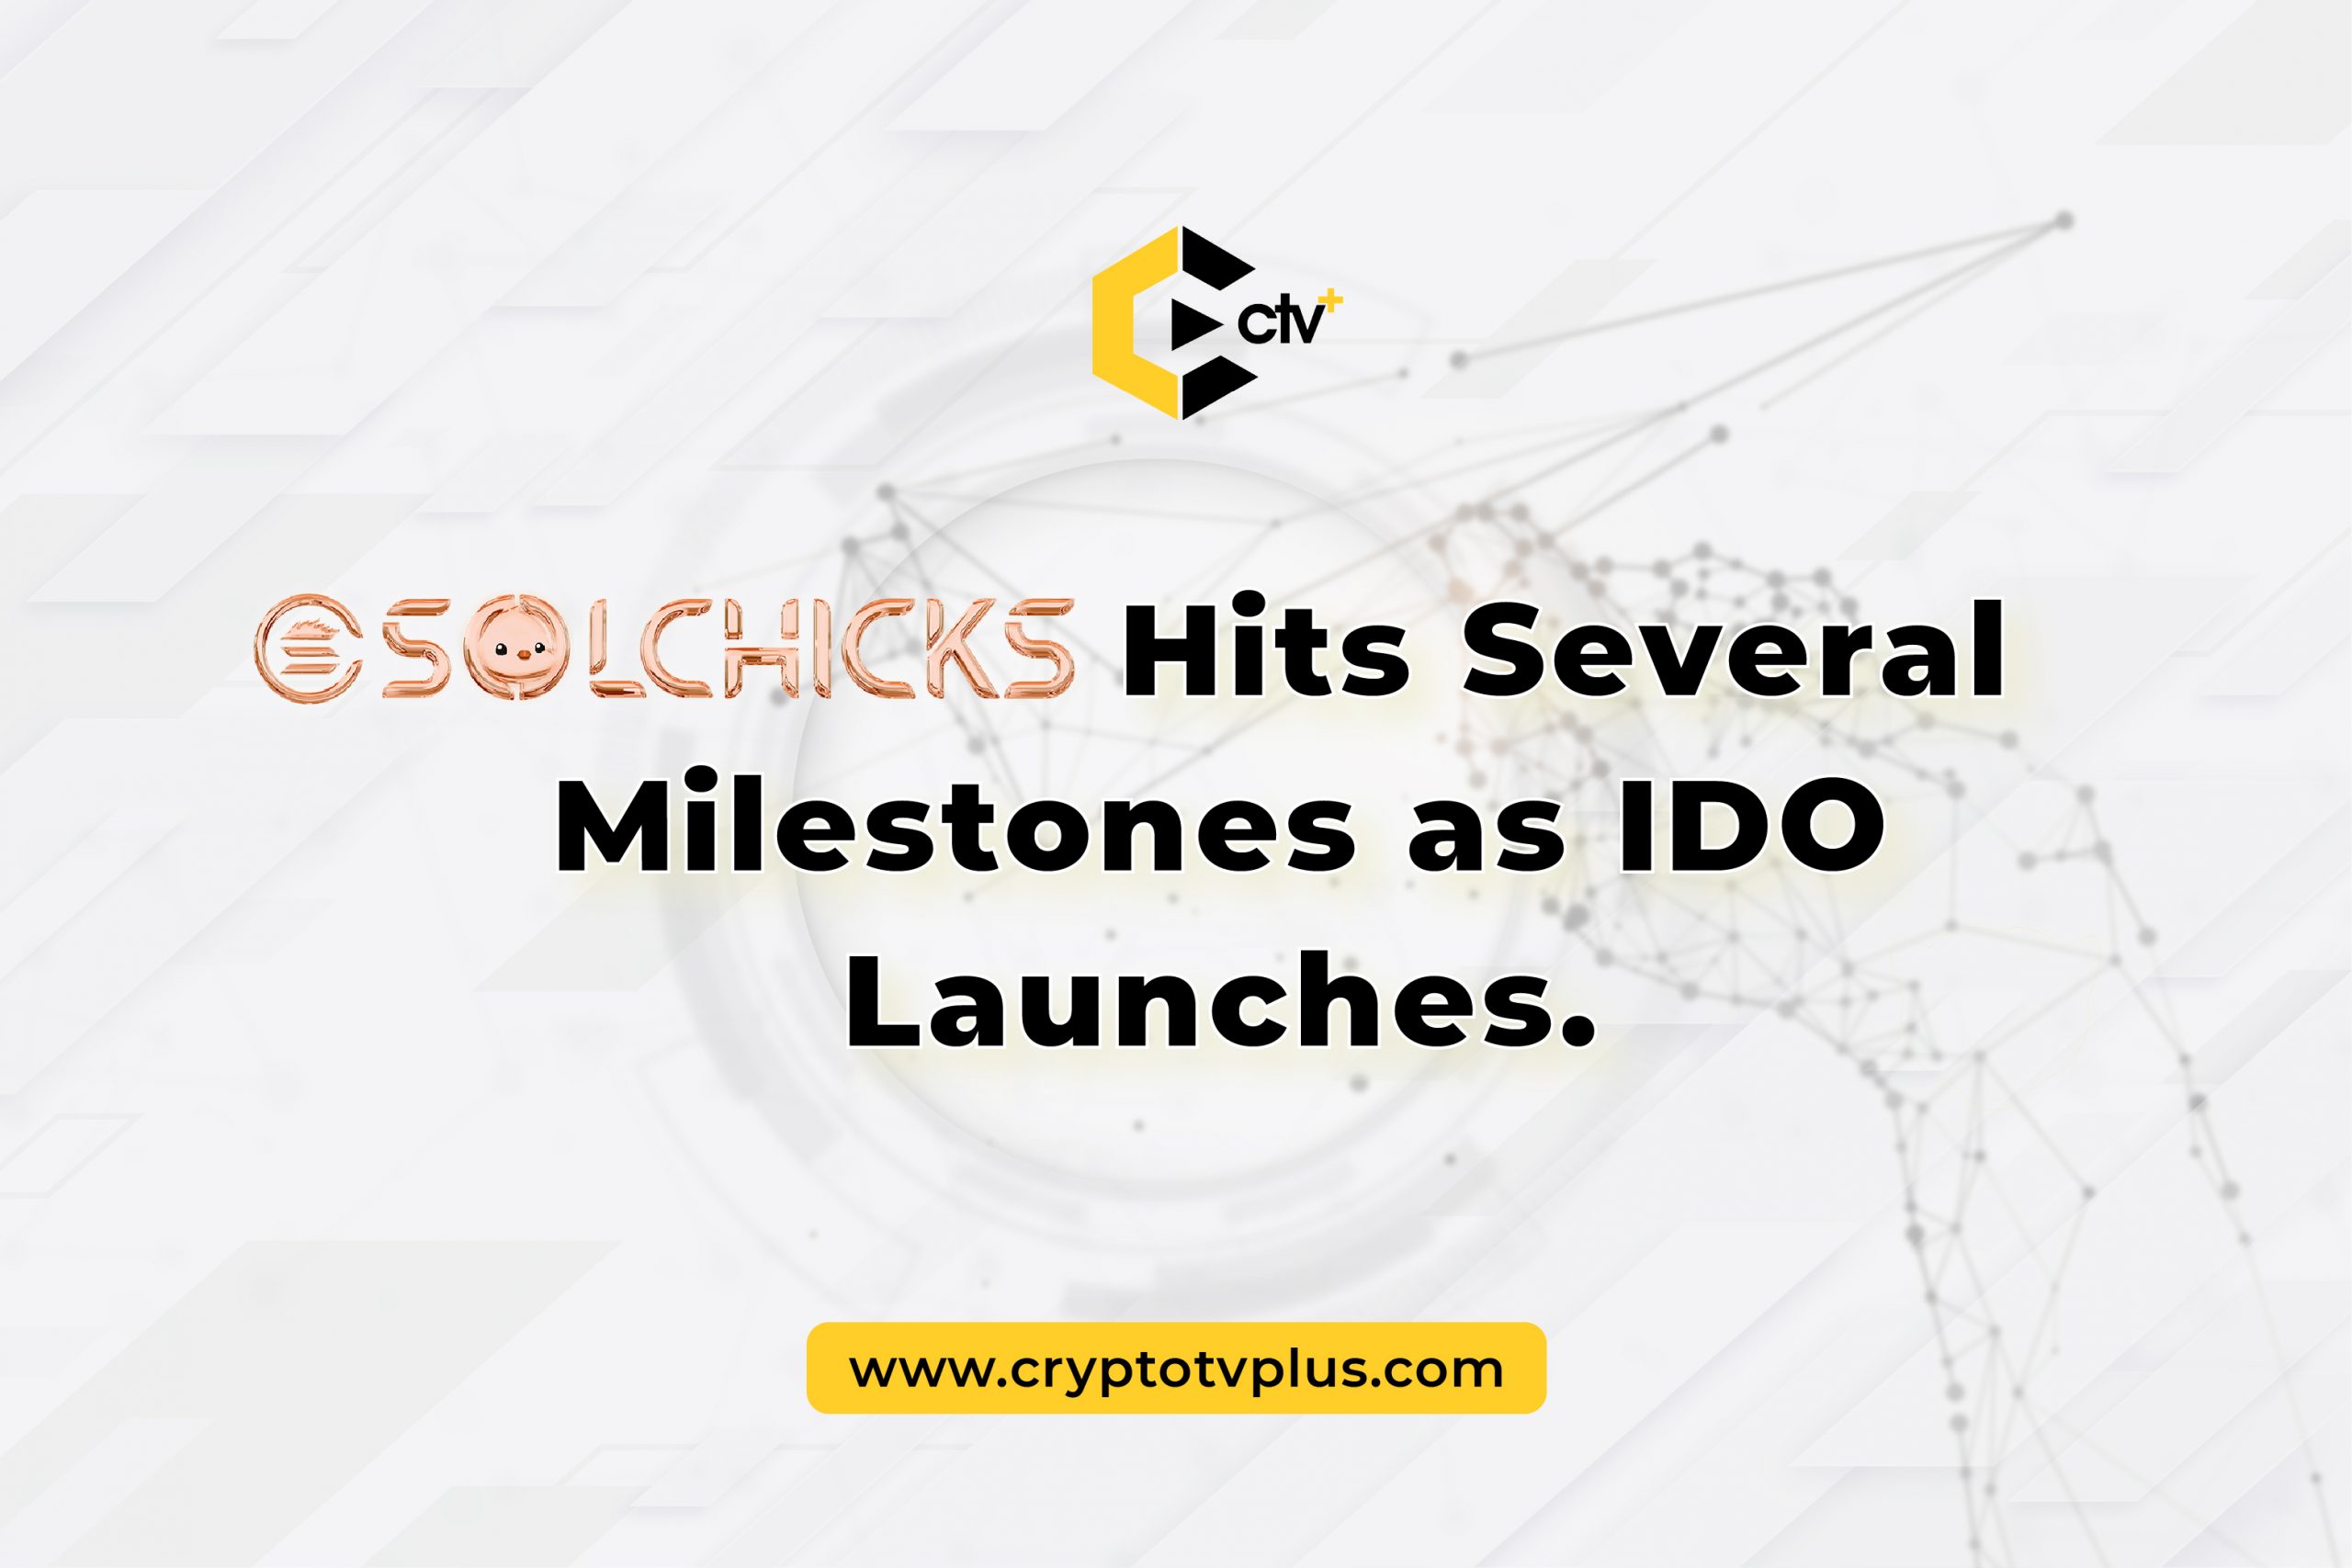 Solchicks Hits Several Milestones as IDO Launches